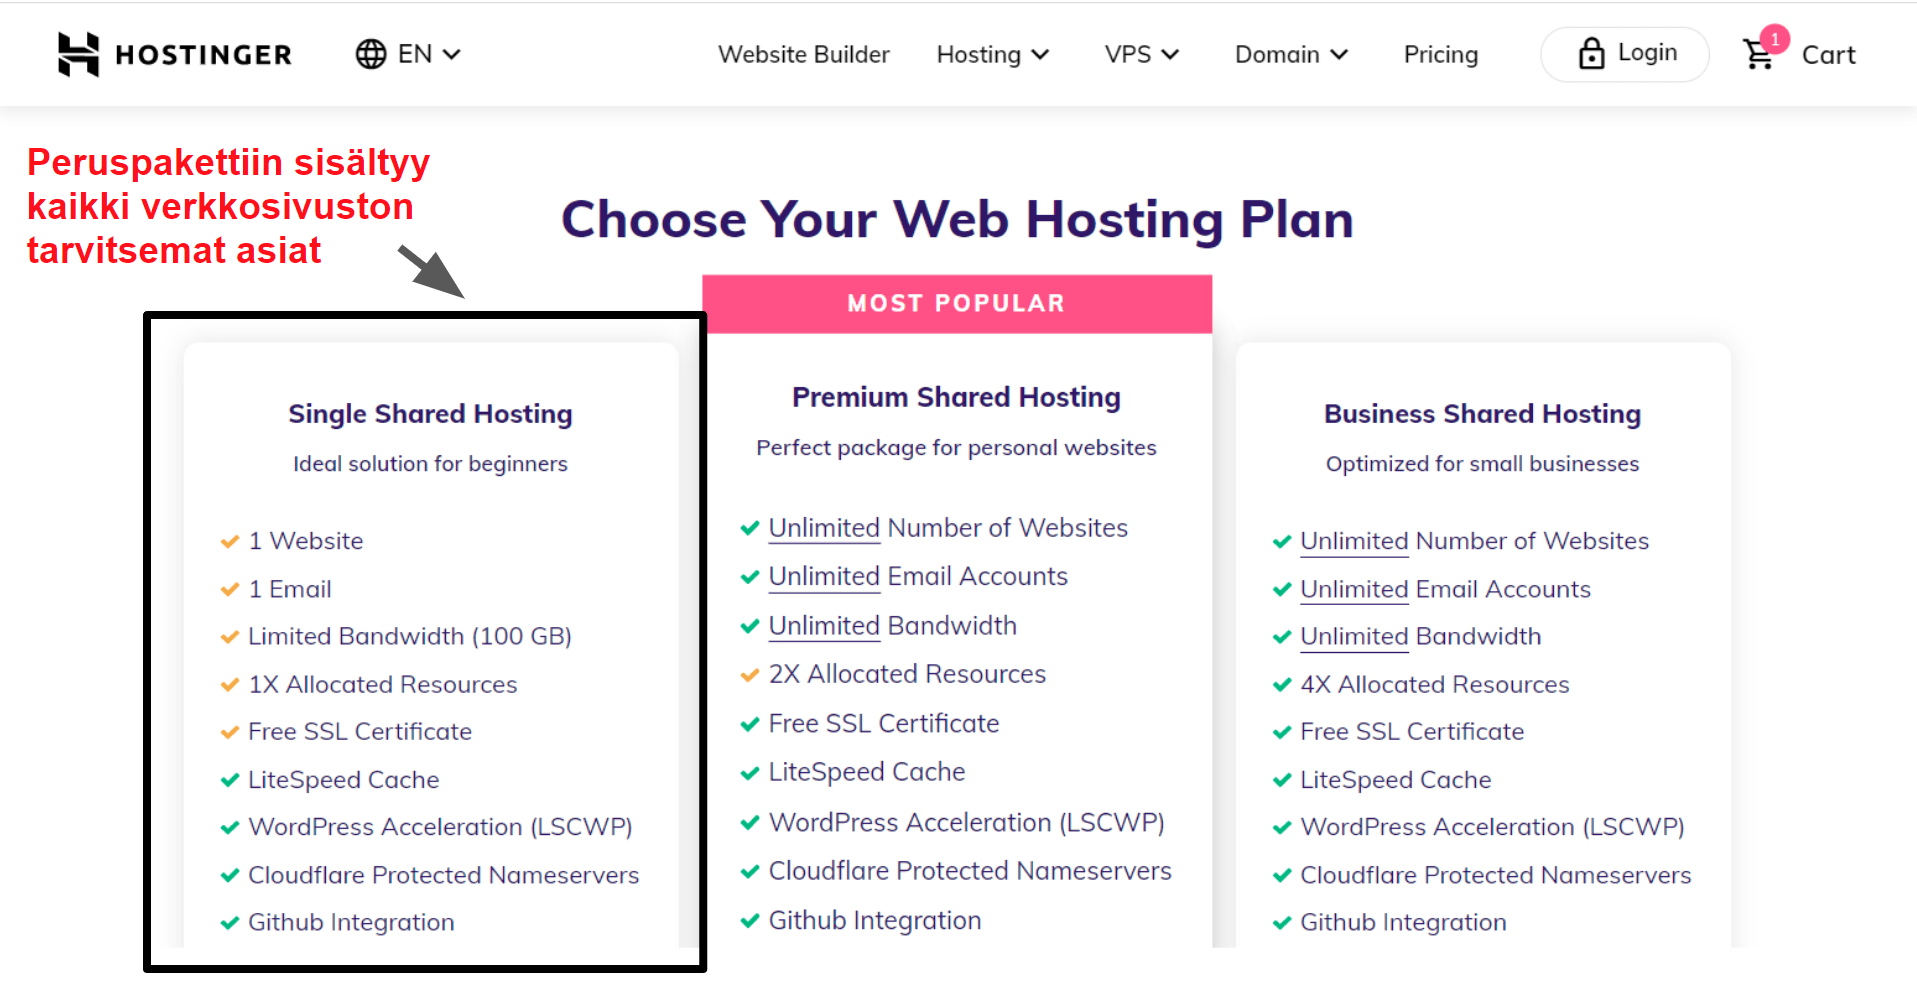 hosting plan features_FI